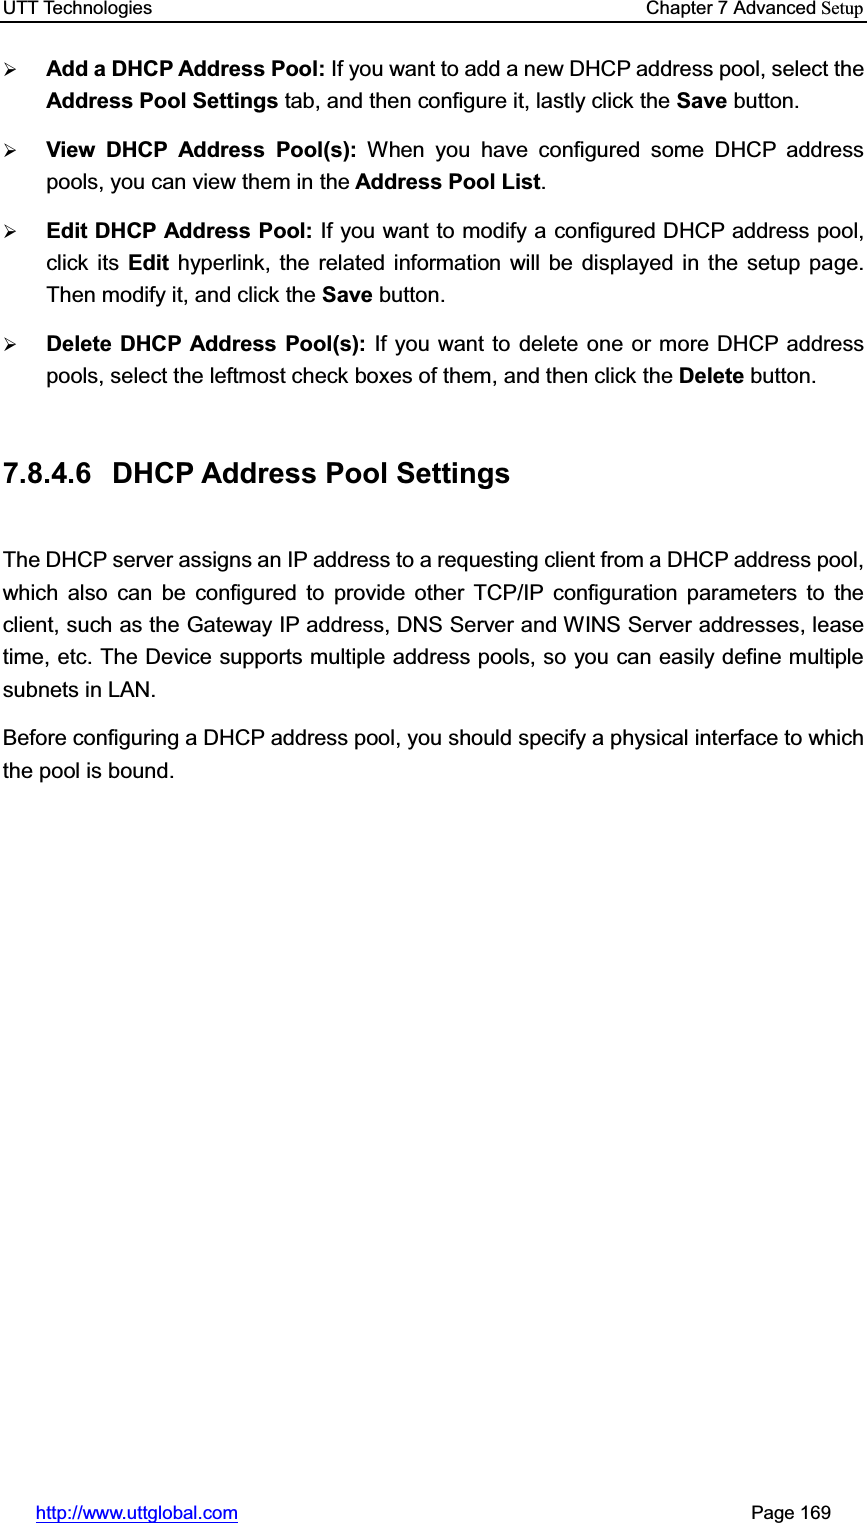 UTT Technologies    Chapter 7 Advanced Setuphttp://www.uttglobal.com                                                       Page 169 ¾Add a DHCP Address Pool: If you want to add a new DHCP address pool, select theAddress Pool Settings tab, and then configure it, lastly click the Save button. ¾View DHCP Address Pool(s): When you have configured some DHCP address pools, you can view them in the Address Pool List.¾Edit DHCP Address Pool: If you want to modify a configured DHCP address pool, click its Edit hyperlink, the related information will be displayed in the setup page. Then modify it, and click the Save button. ¾Delete DHCP Address Pool(s): If you want to delete one or more DHCP address pools, select the leftmost check boxes of them, and then click the Delete button.7.8.4.6 DHCP Address Pool Settings The DHCP server assigns an IP address to a requesting client from a DHCP address pool, which also can be configured to provide other TCP/IP configuration parameters to the client, such as the Gateway IP address, DNS Server and WINS Server addresses, lease time, etc. The Device supports multiple address pools, so you can easily define multiple subnets in LAN.   Before configuring a DHCP address pool, you should specify a physical interface to which the pool is bound. 